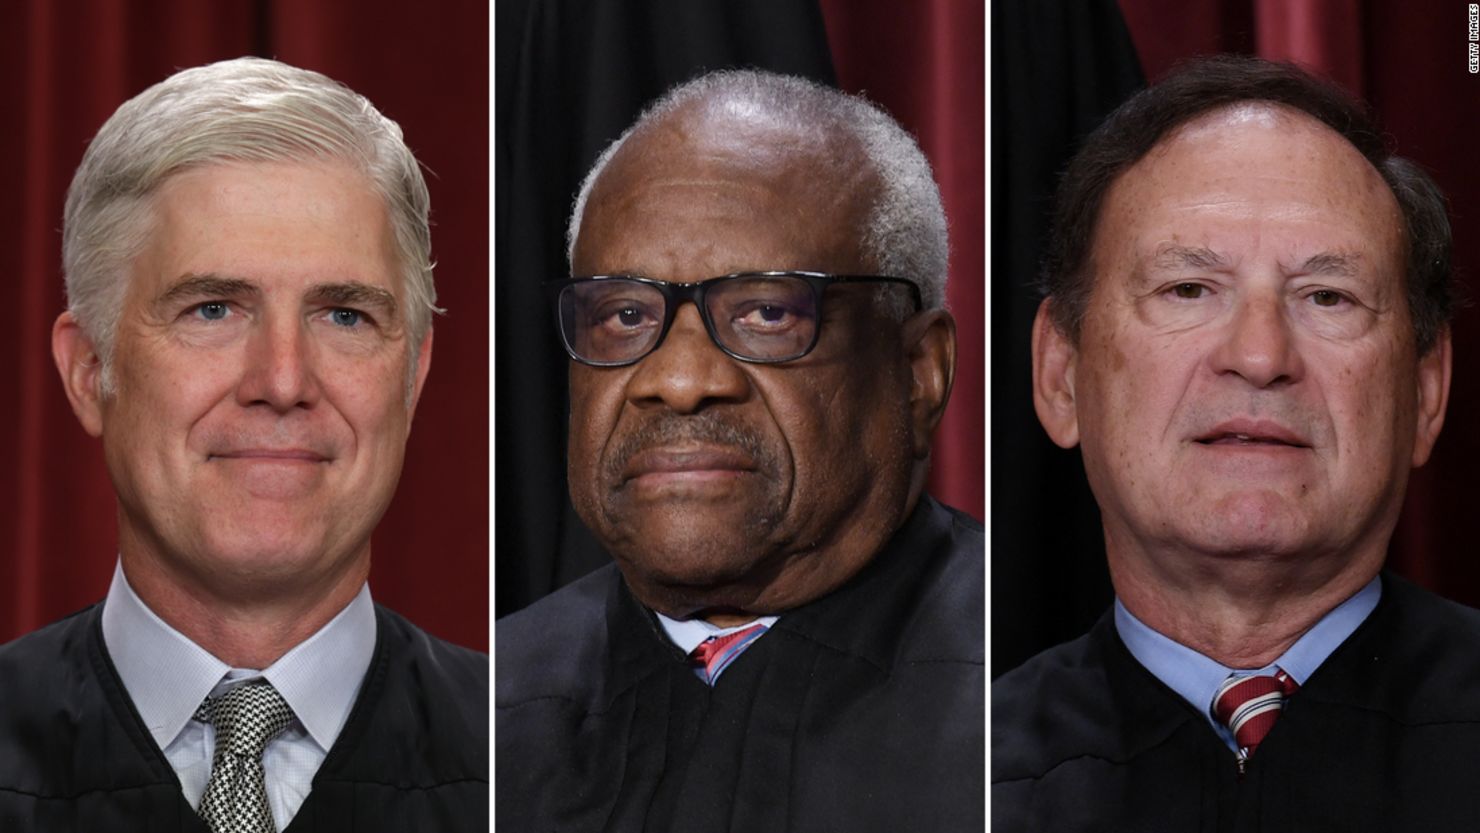 Justices Neil Gorsuch, Clarence Thomas and Samuel Alito.